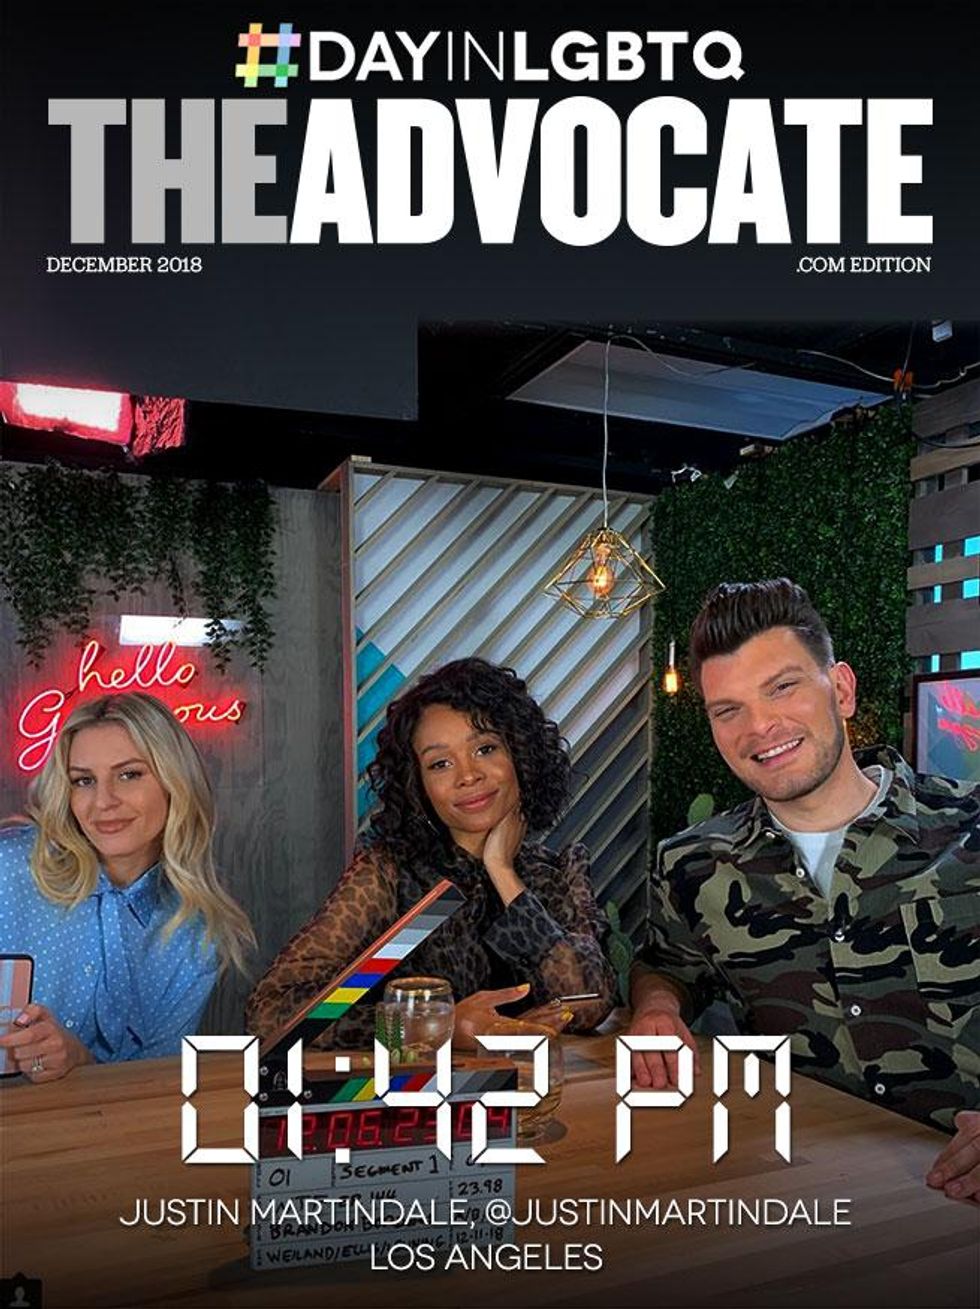 Pm-01-43-justin-theadvocate-2018-dayinlgbt-cover-template-655